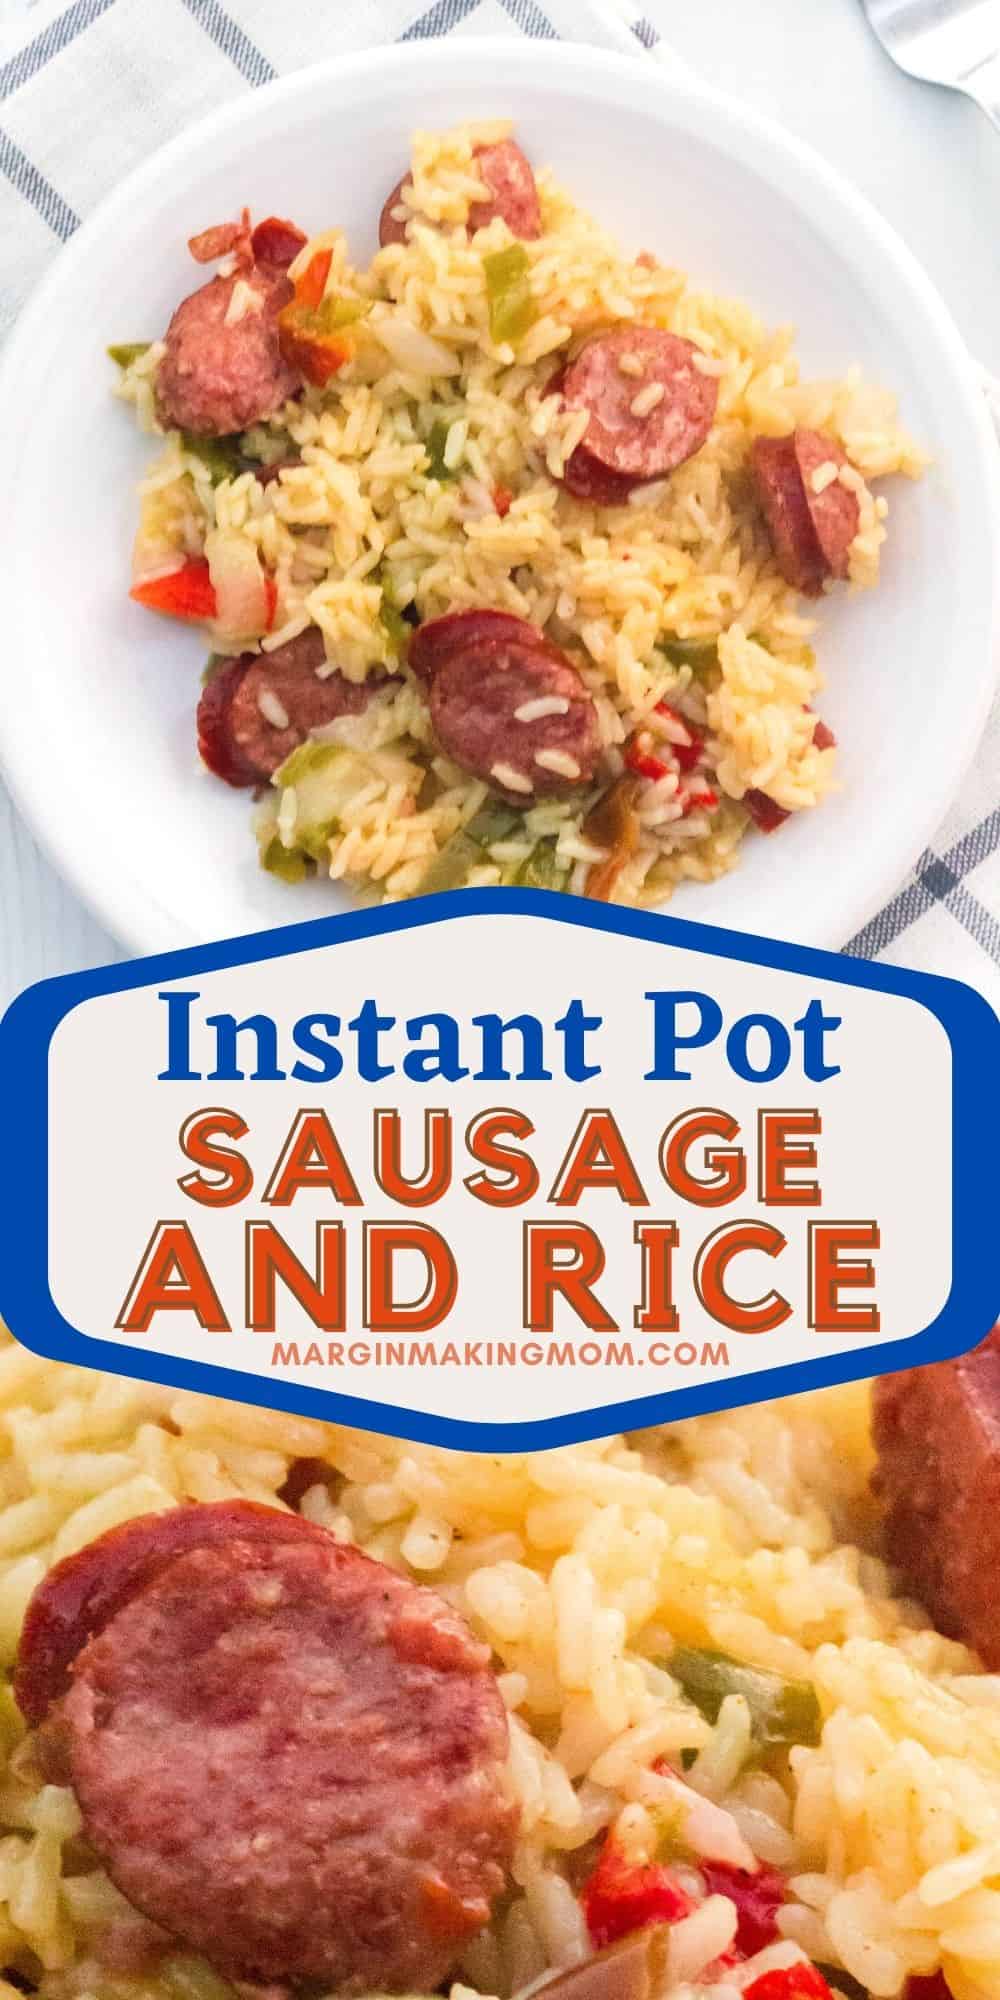 collage image featuring two photos of Instant Pot smoked sausage and rice. One is a close-up and one is a photo of the sausage and rice served on a plate.